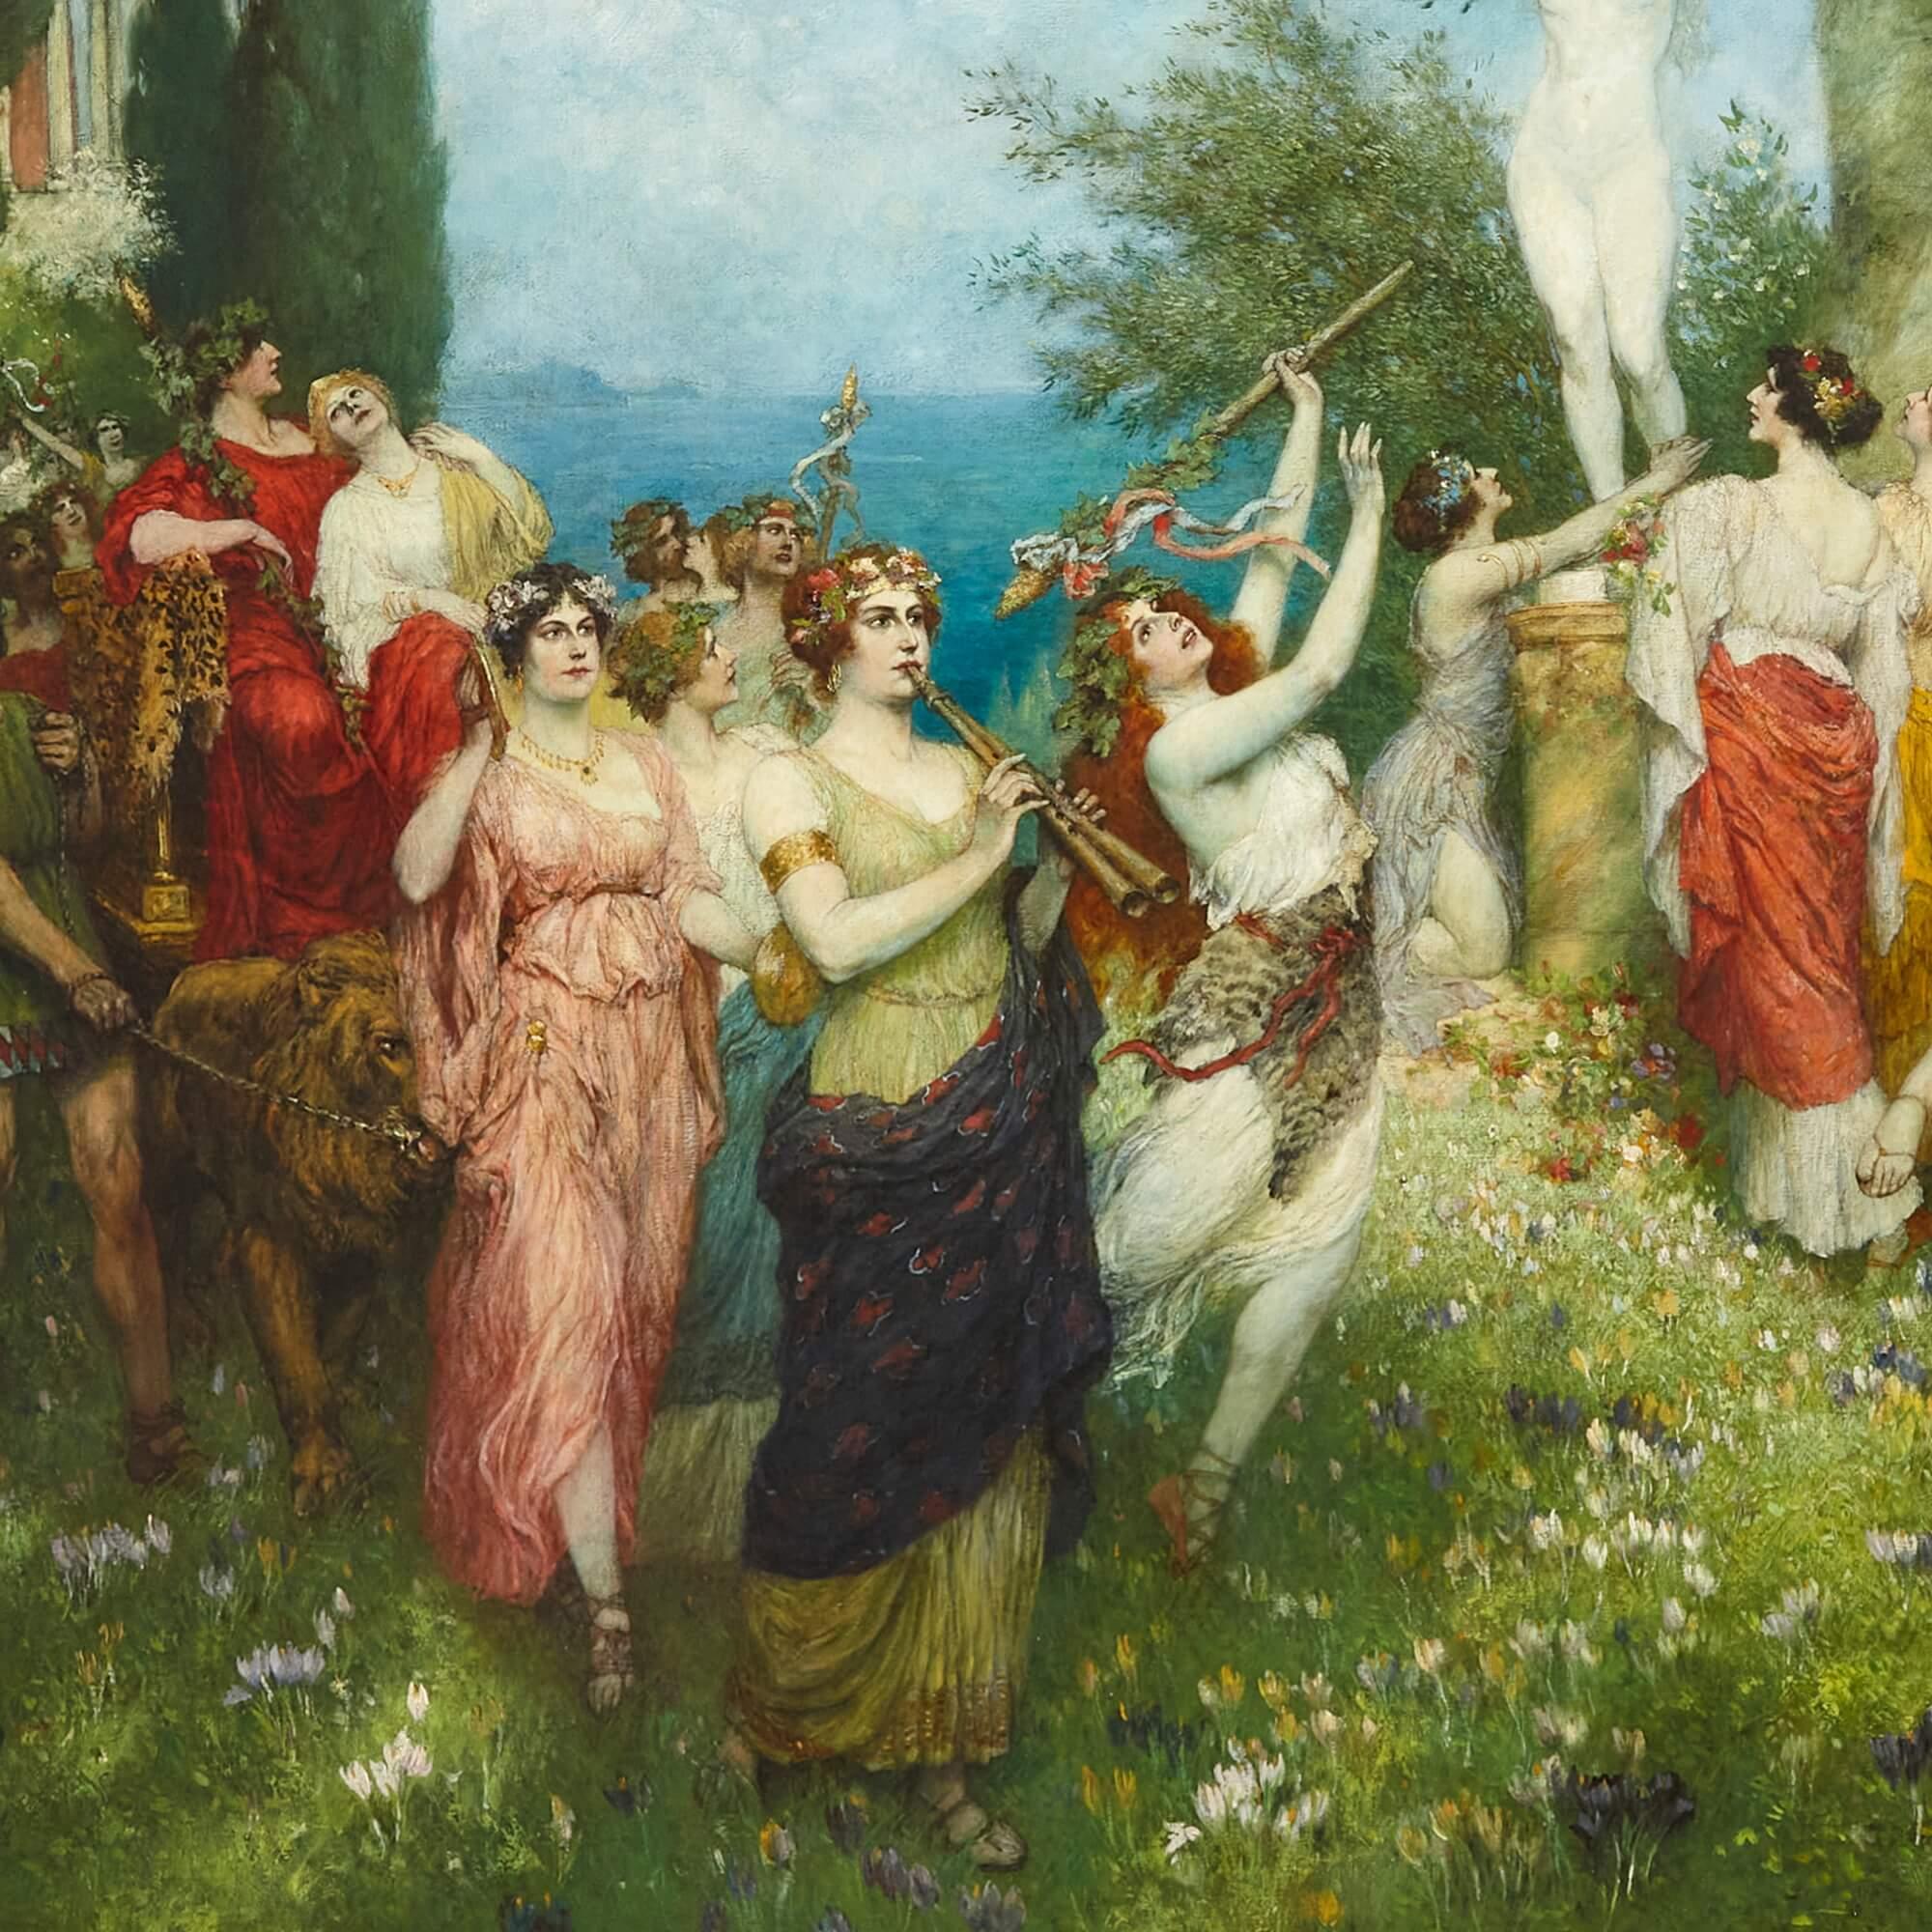 The Triumph of Bacchus, a large oil painting by Ferdinand Leeke
Oil-on-canvas, German, 1918
Frame: height 175cm, width 227cm, depth 10cm
Canvas: height 148cm, width 200cm, depth 3cm

This exceptional painting, large in scale, depicts a popular and